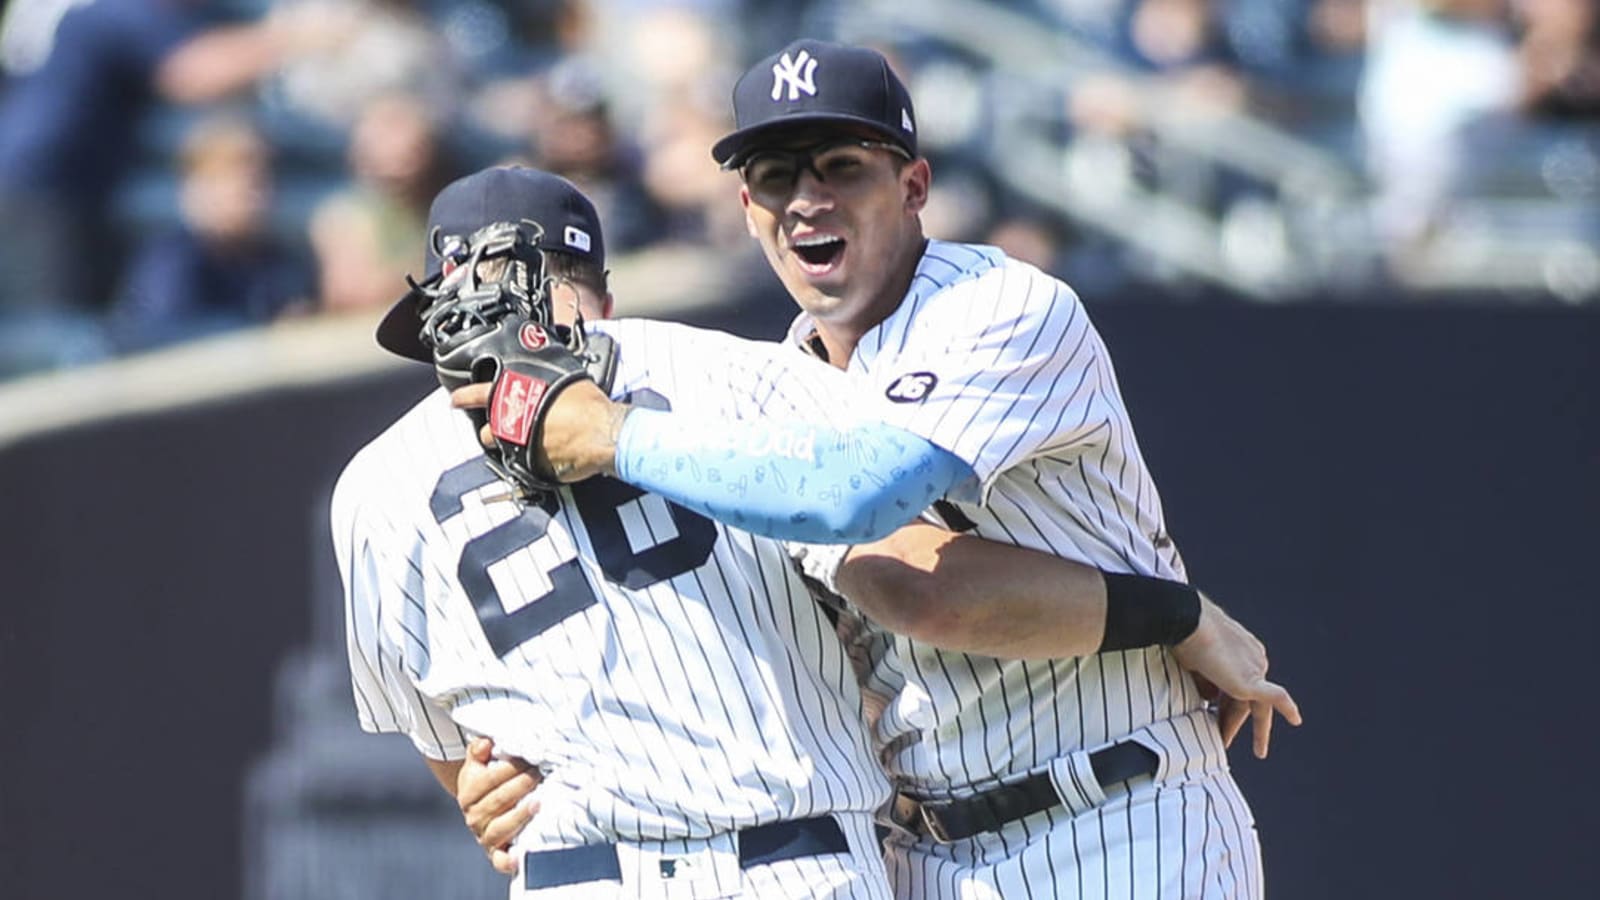 Yankees seal win with triple play to tie MLB record